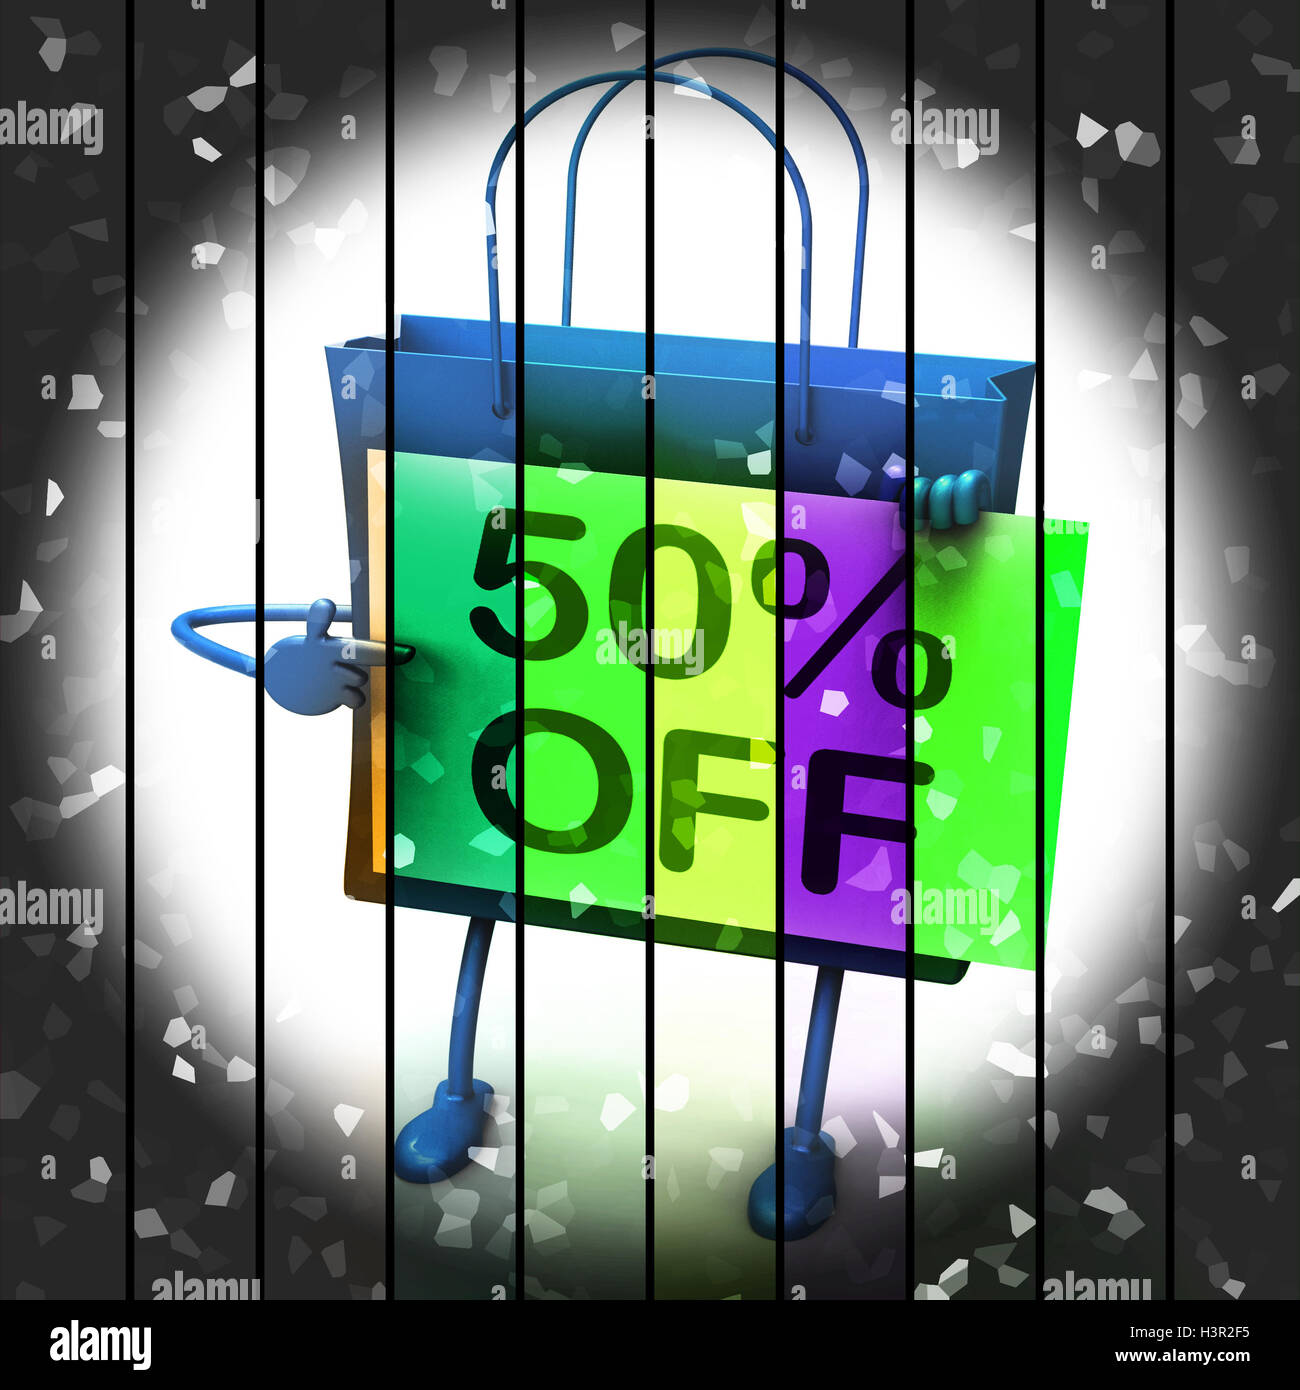 Fifty Percent Reduced On Bags Shows 50 Bargains Stock Photo